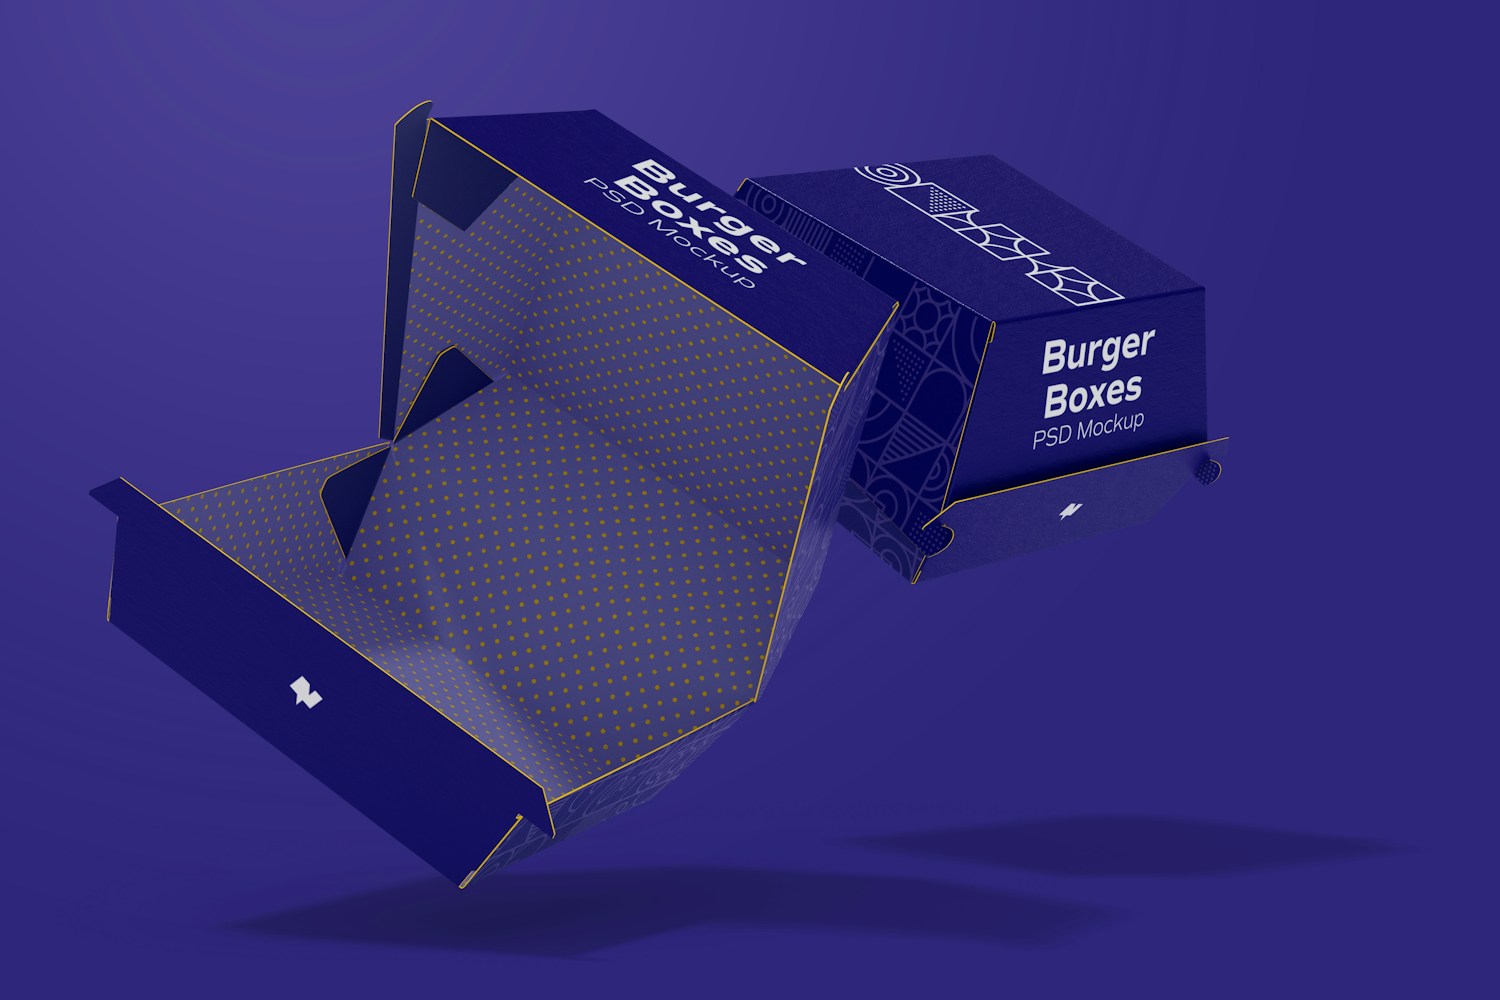 Are you designing a Burger Packaging? This mockup is for you!